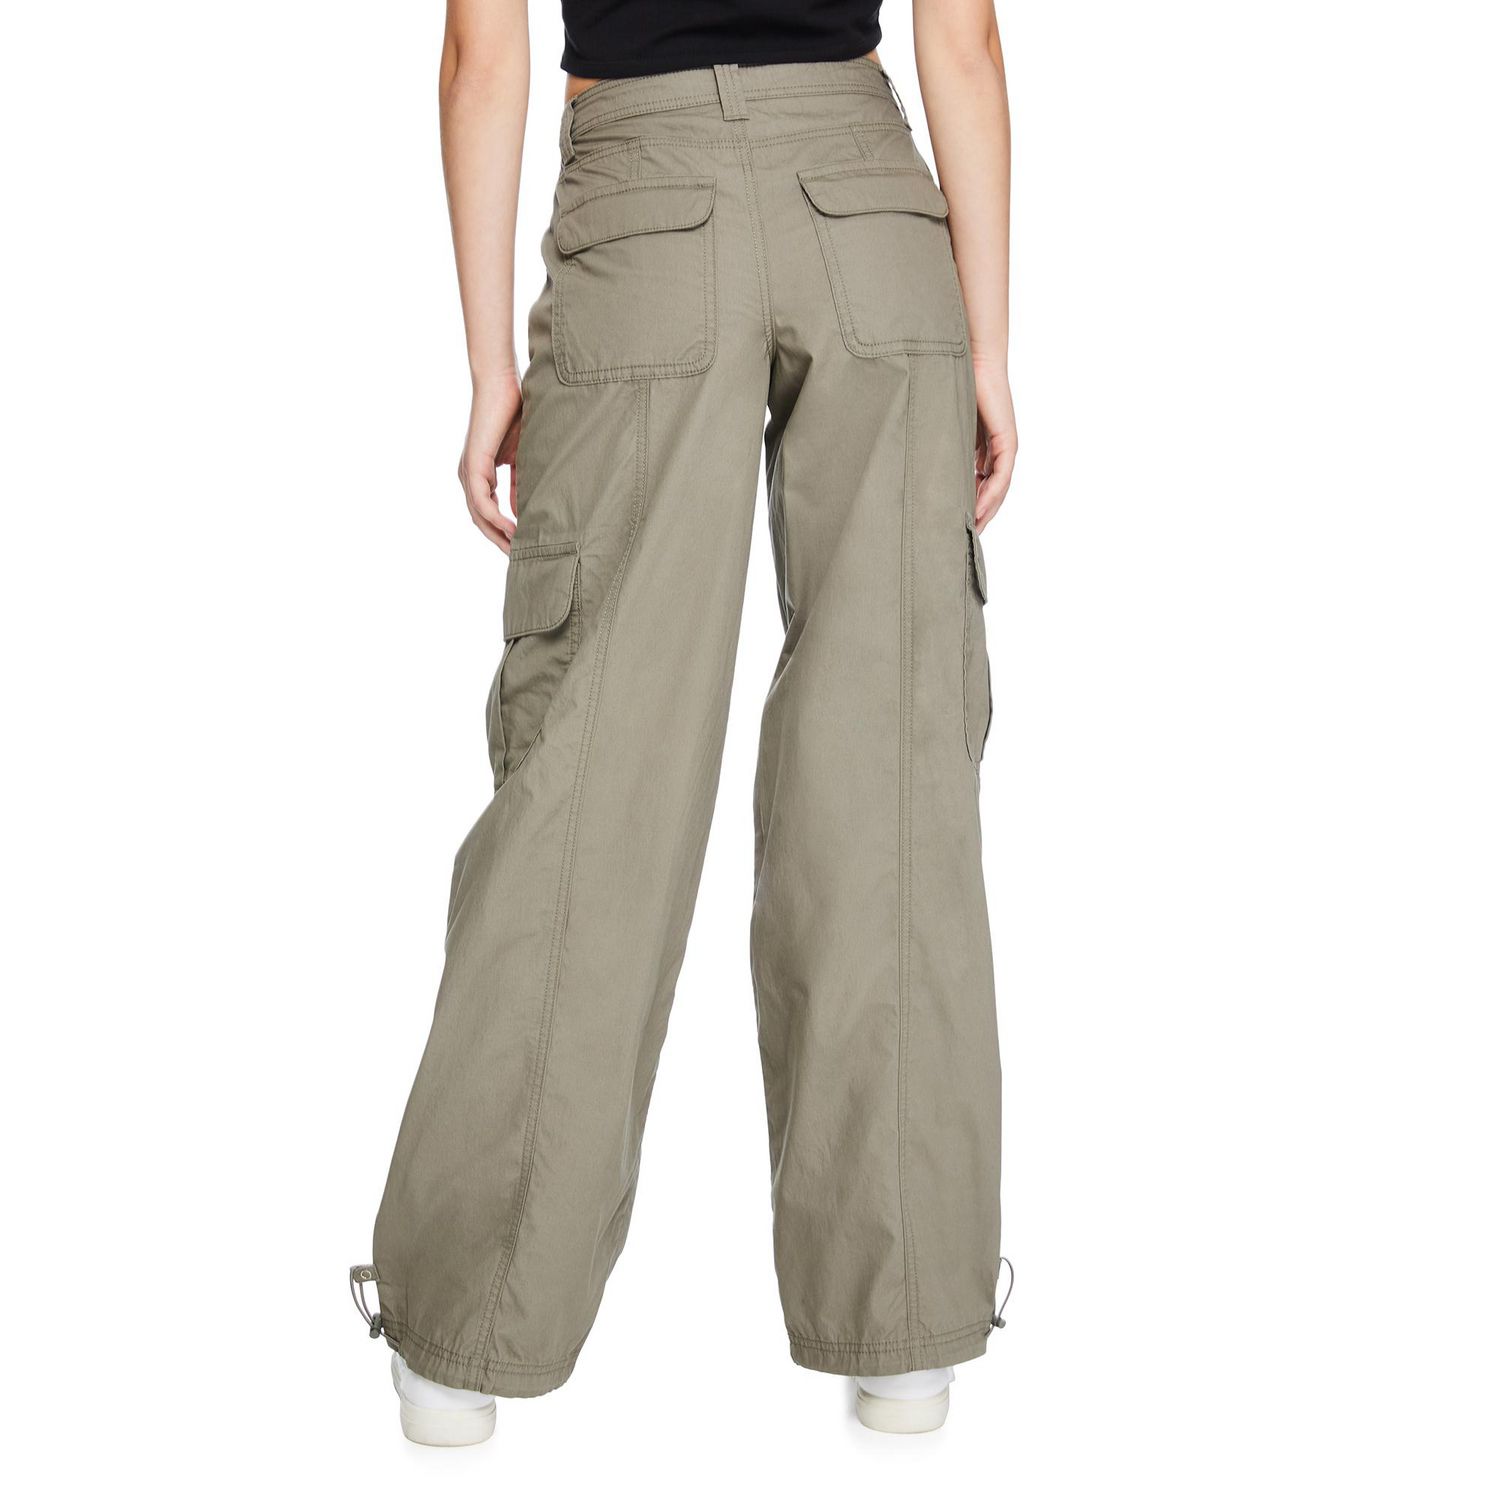 TopLLC Women's Flex Stretch Tactical Pants, Cargo Pants Water Resistant  Ripstop Work Pants, Elastic Waist Straight/Cargo Pants with Pockets